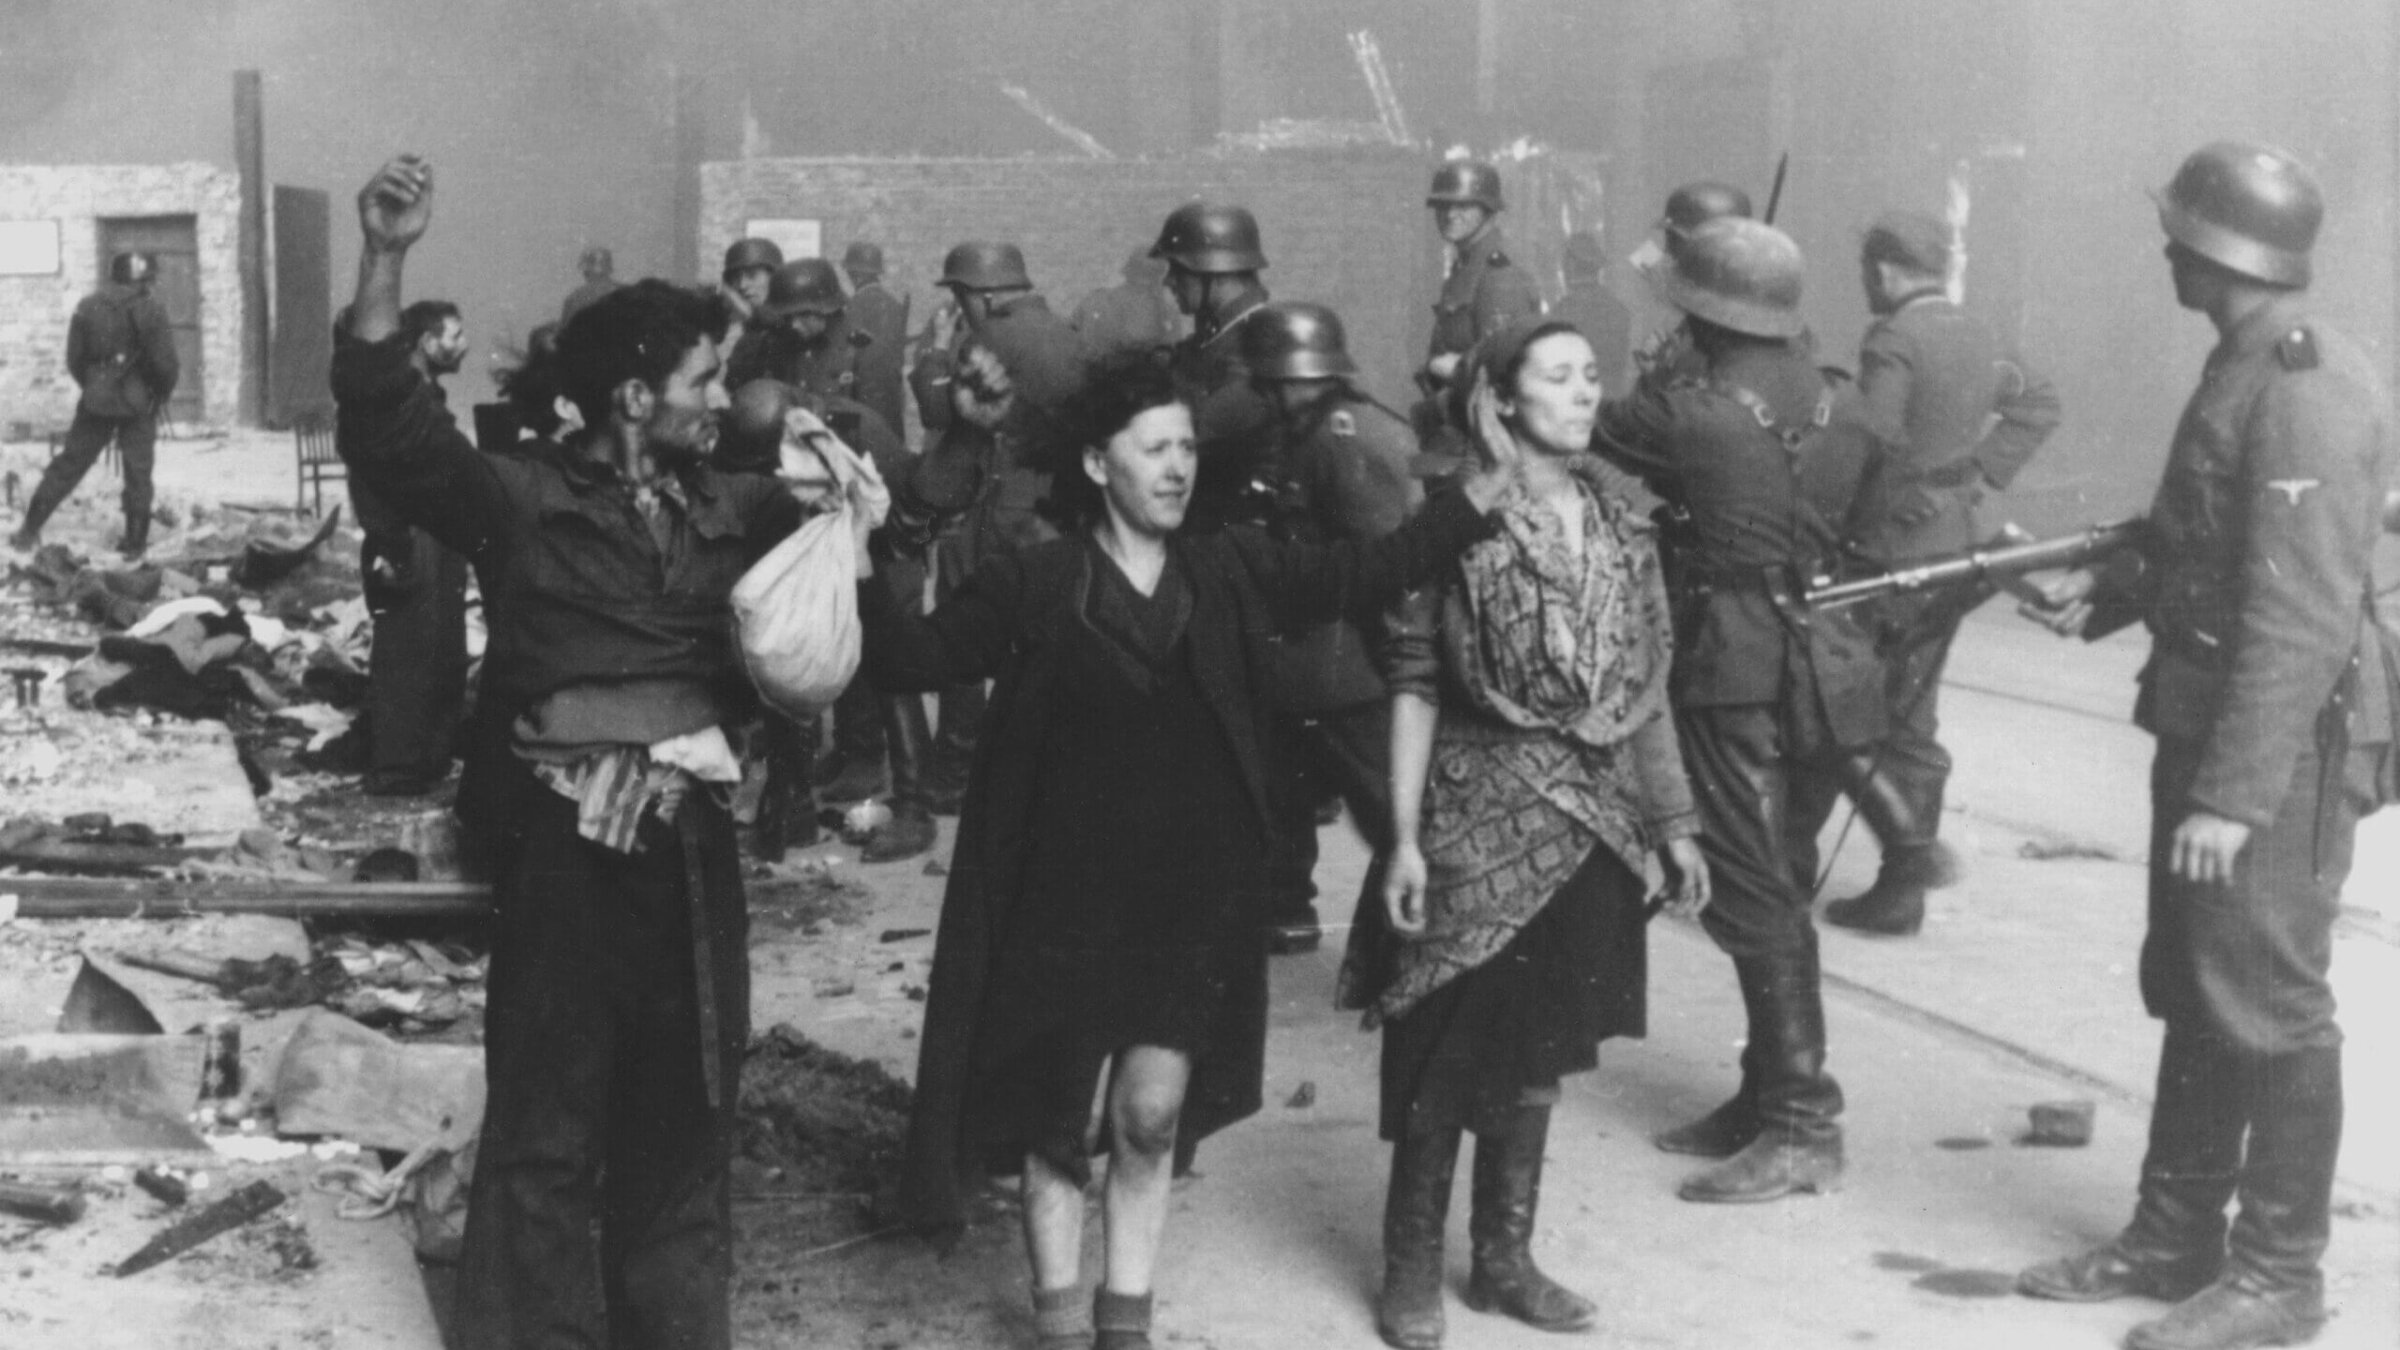 Jews being rounded up during the Warsaw Ghetto Uprising, 1943.